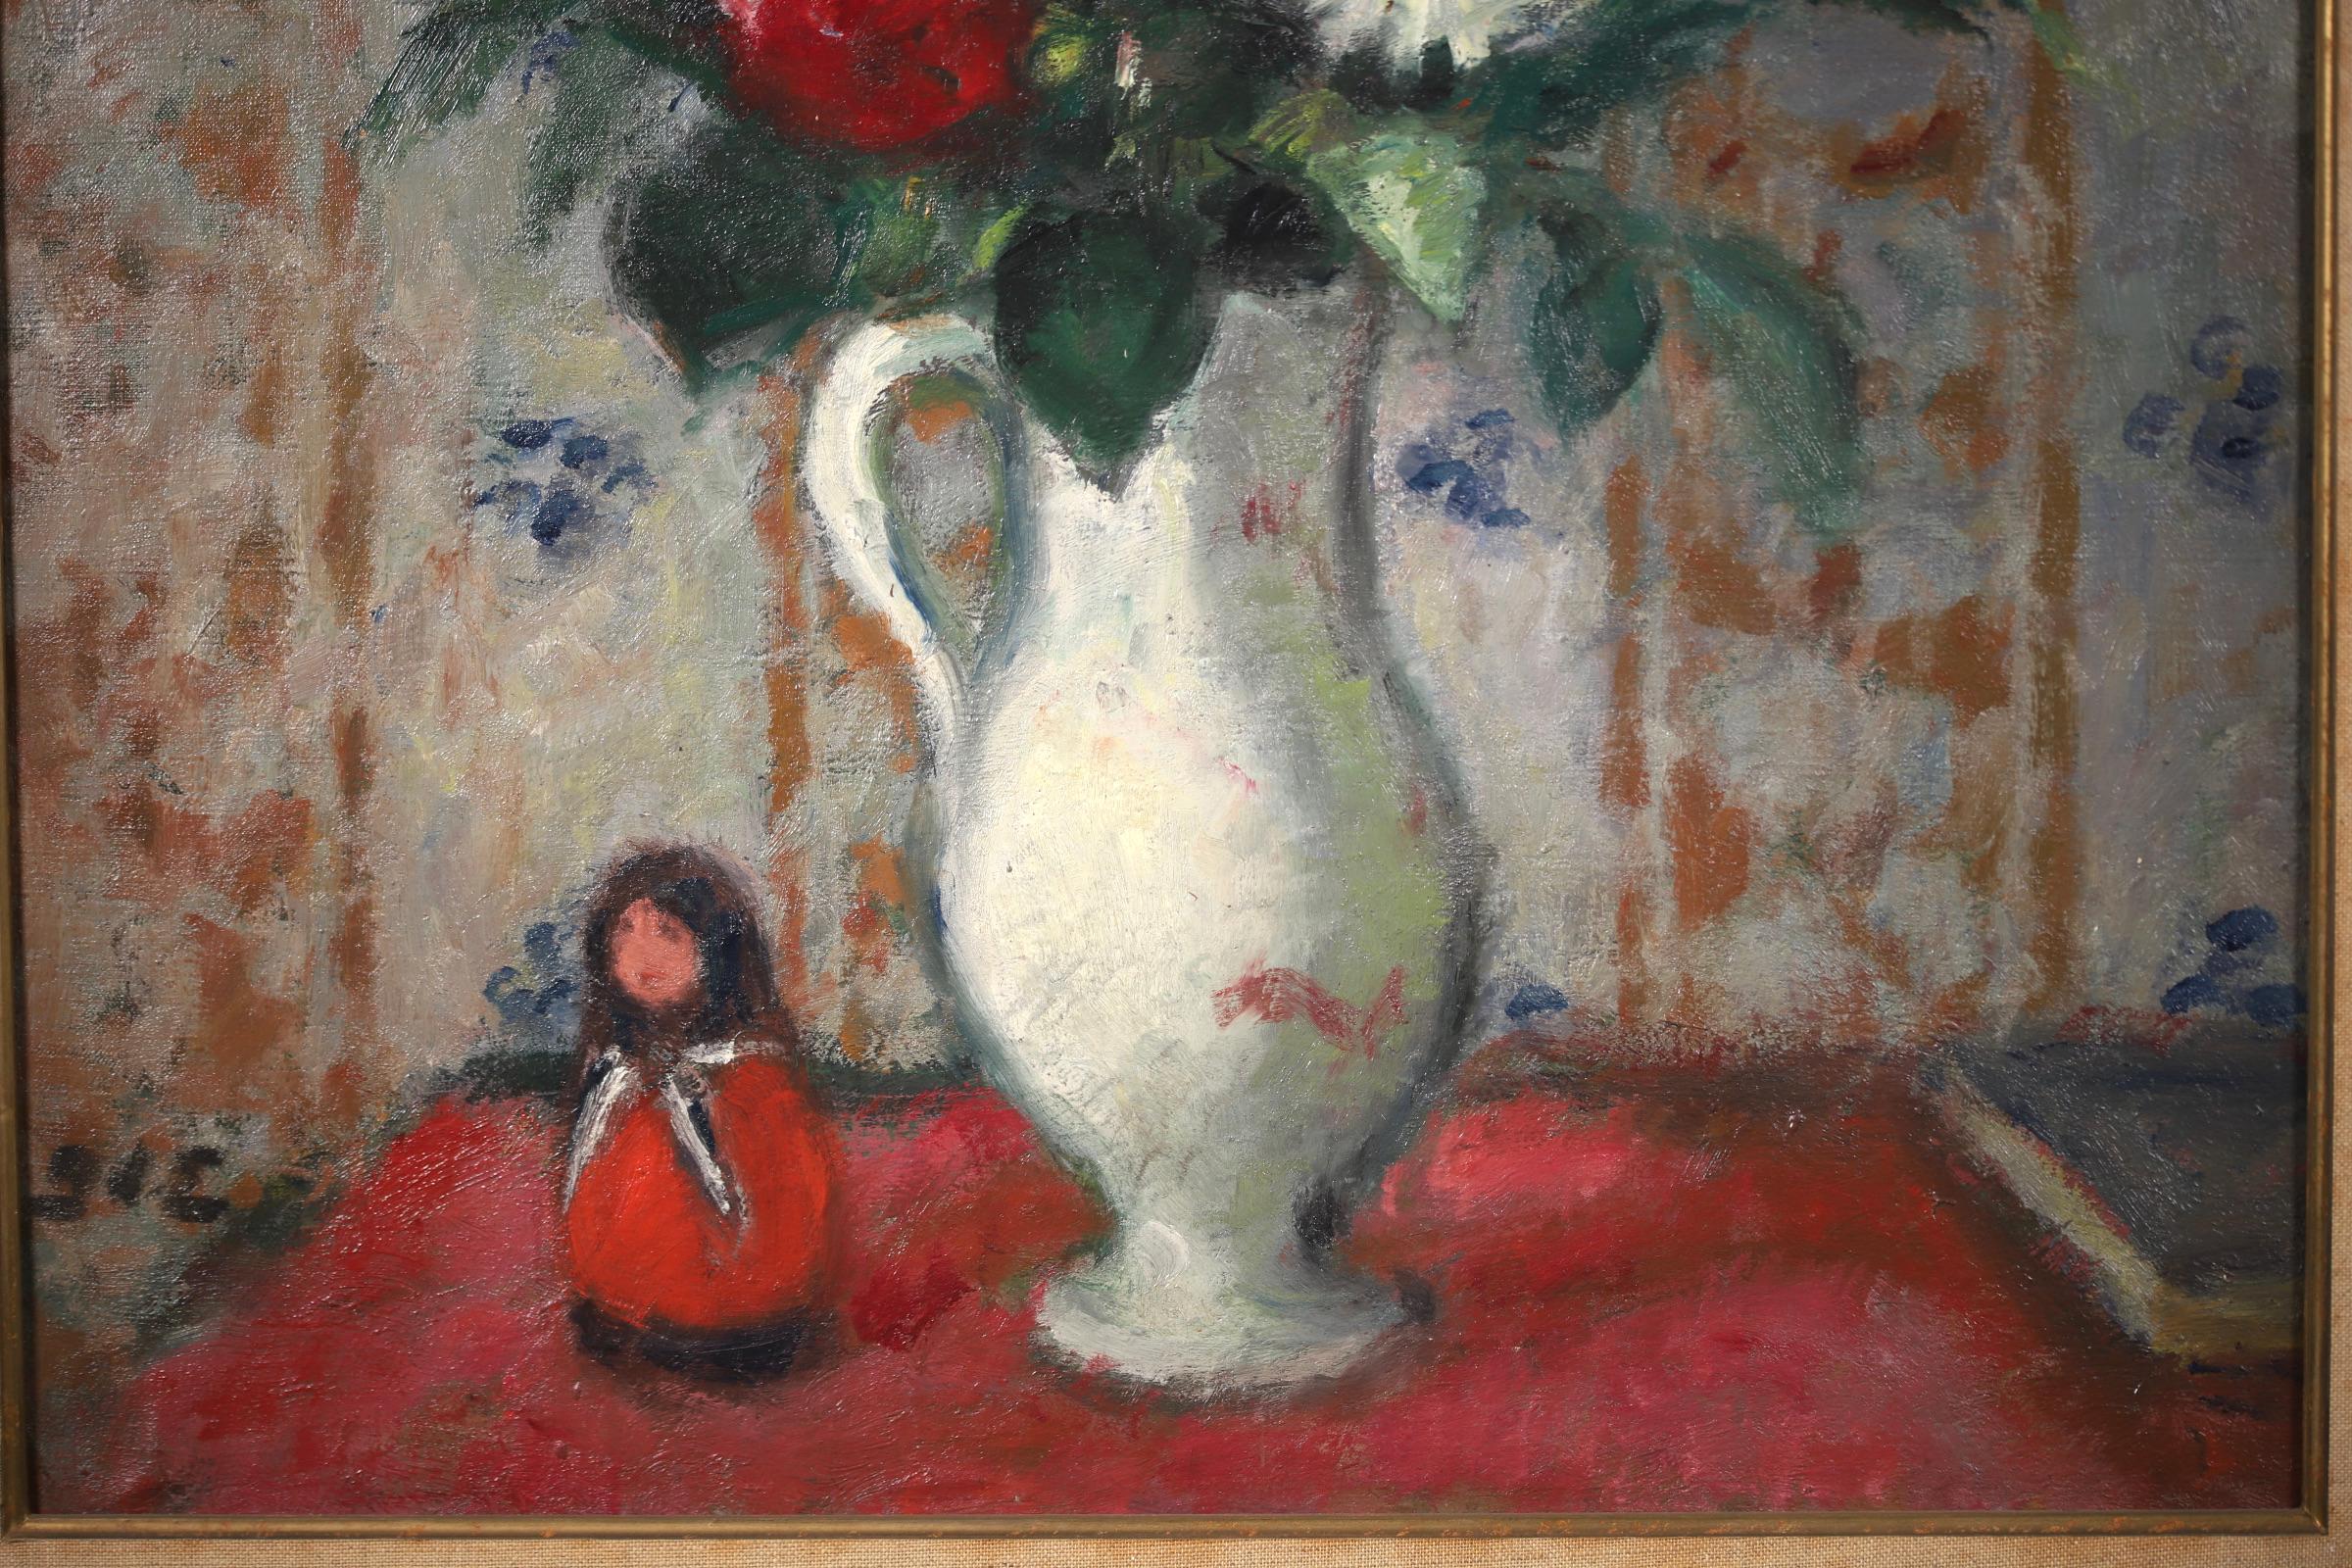 A wonderful still life oil on canvas circa 1925 by French post impressionist painter Georges D'Espagnat. The work depicts a white jug filled with white and red blooms, placed on a red tablecloth. Beside it is a Matroyshka - also known as a Russian